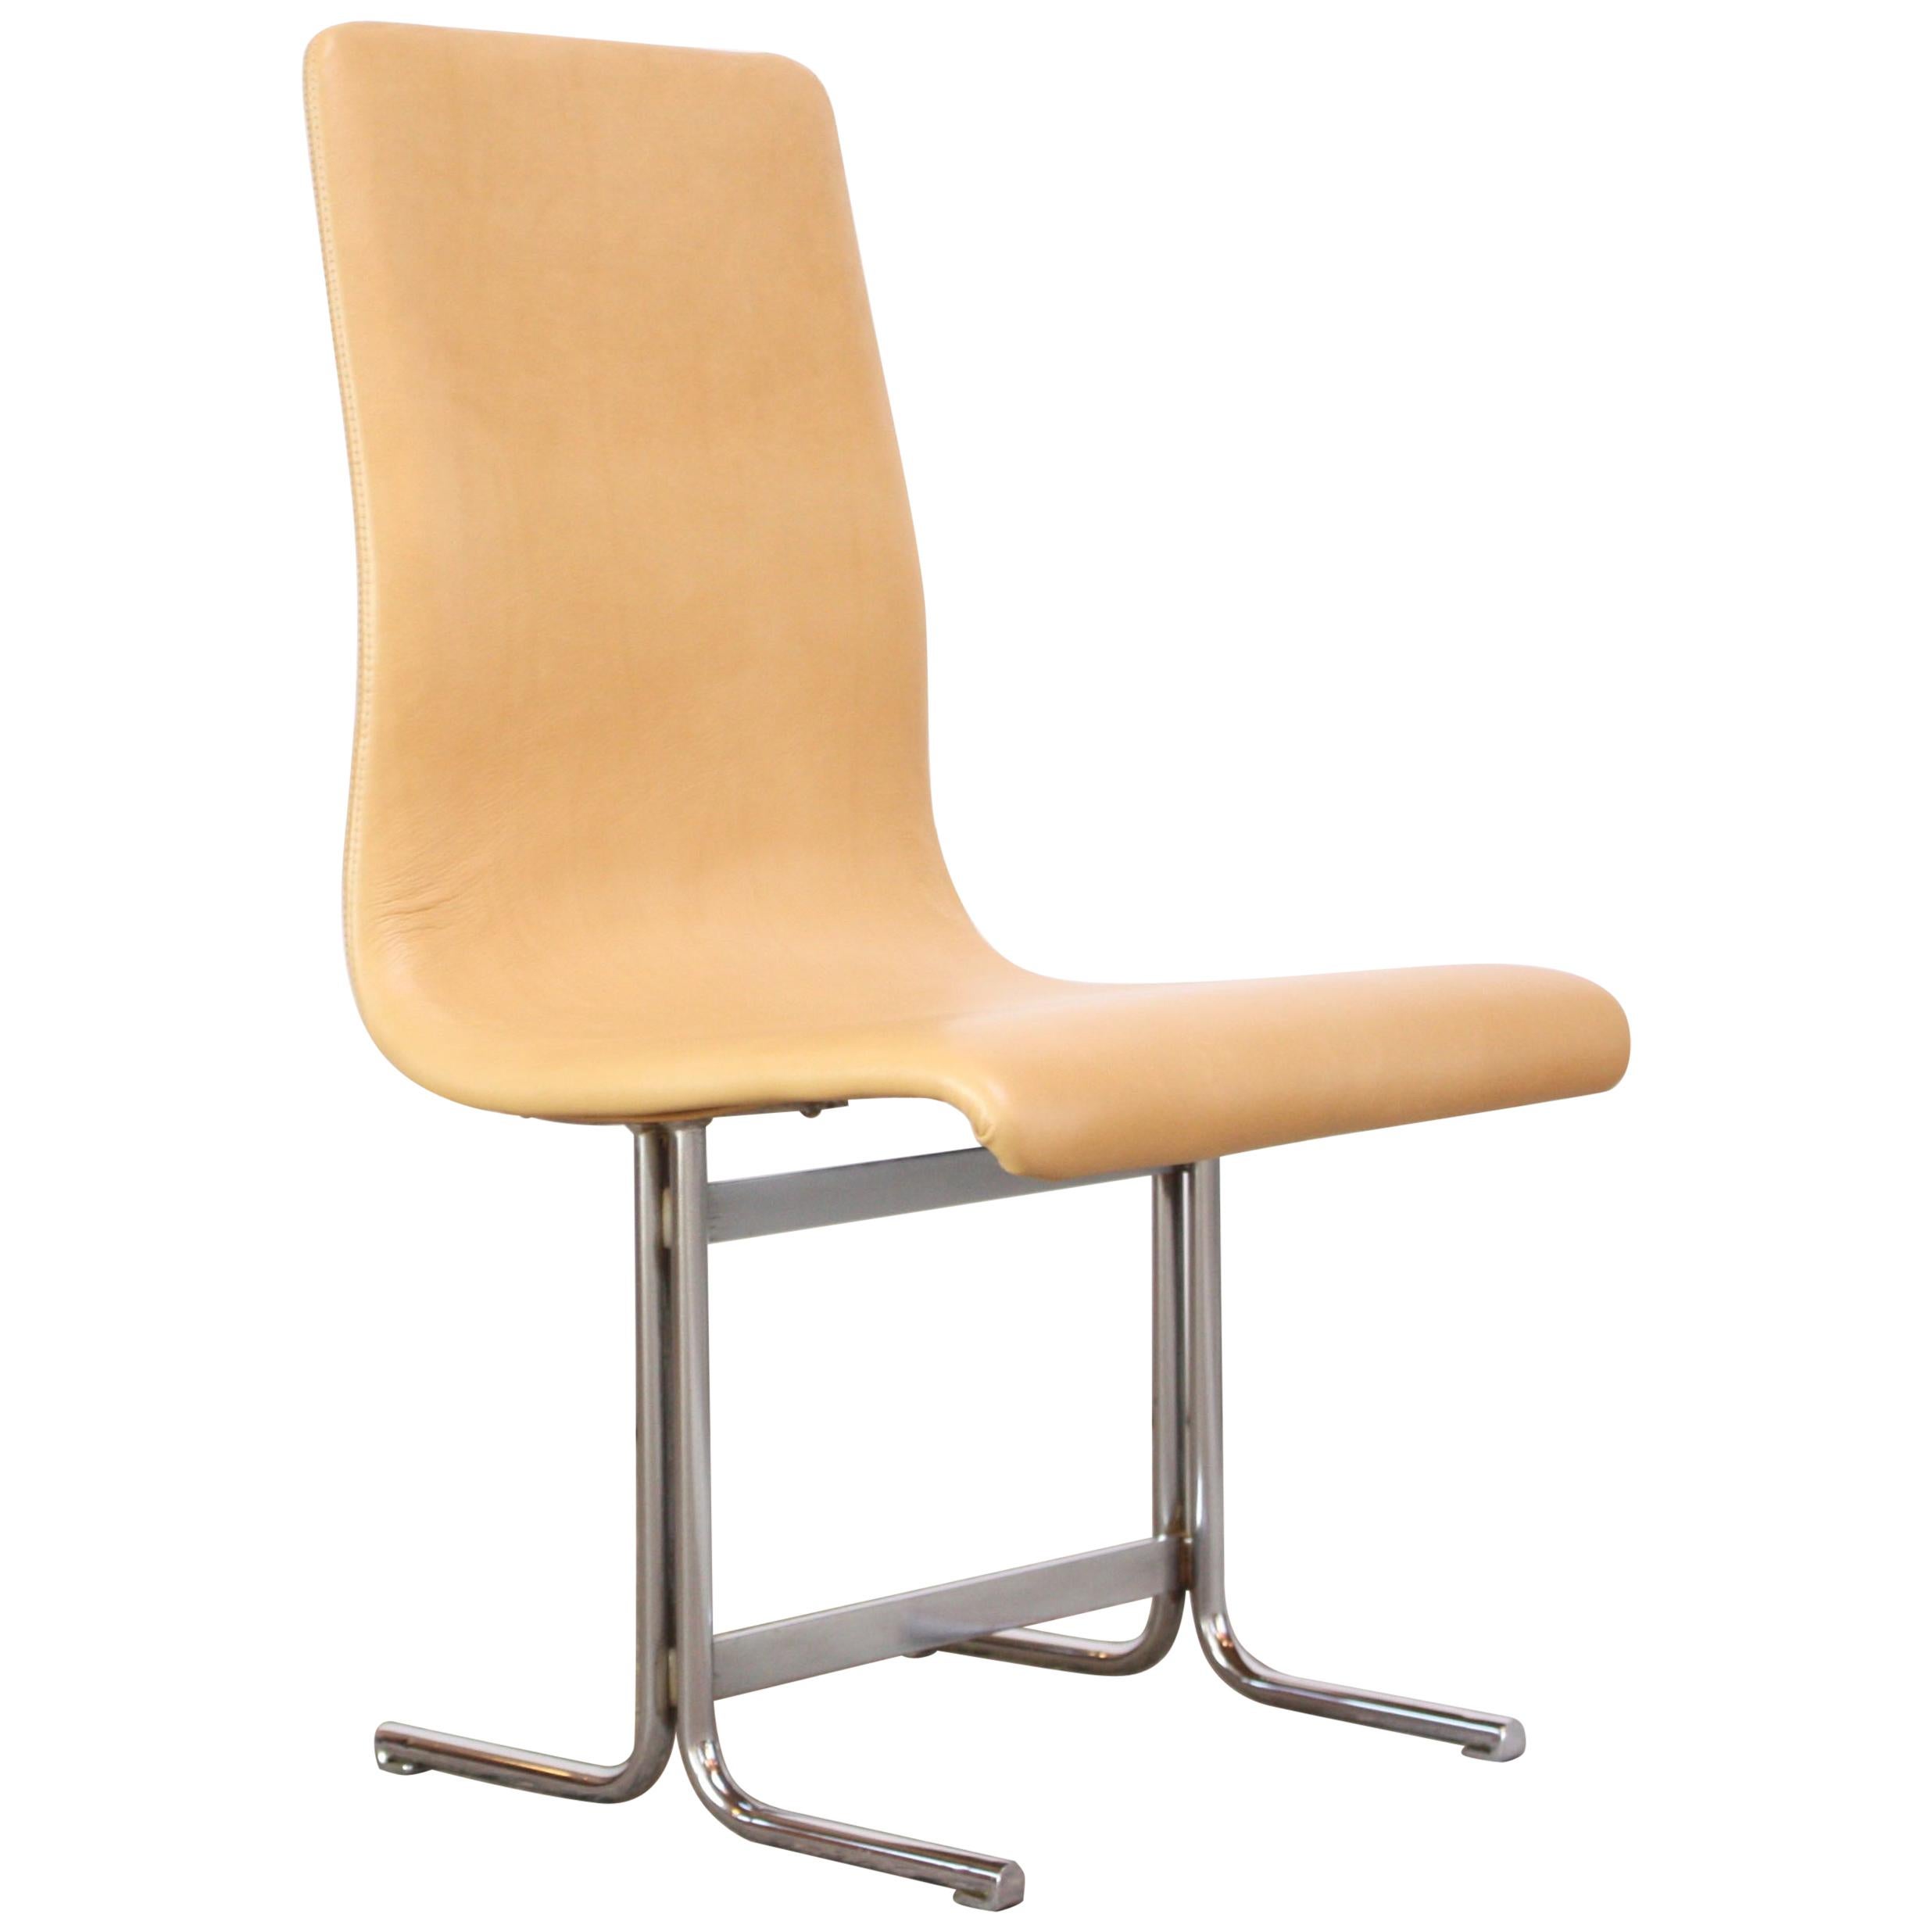 Swedish Modern Leather and Chrome Accent Chair by Vemo Industri AB For Sale